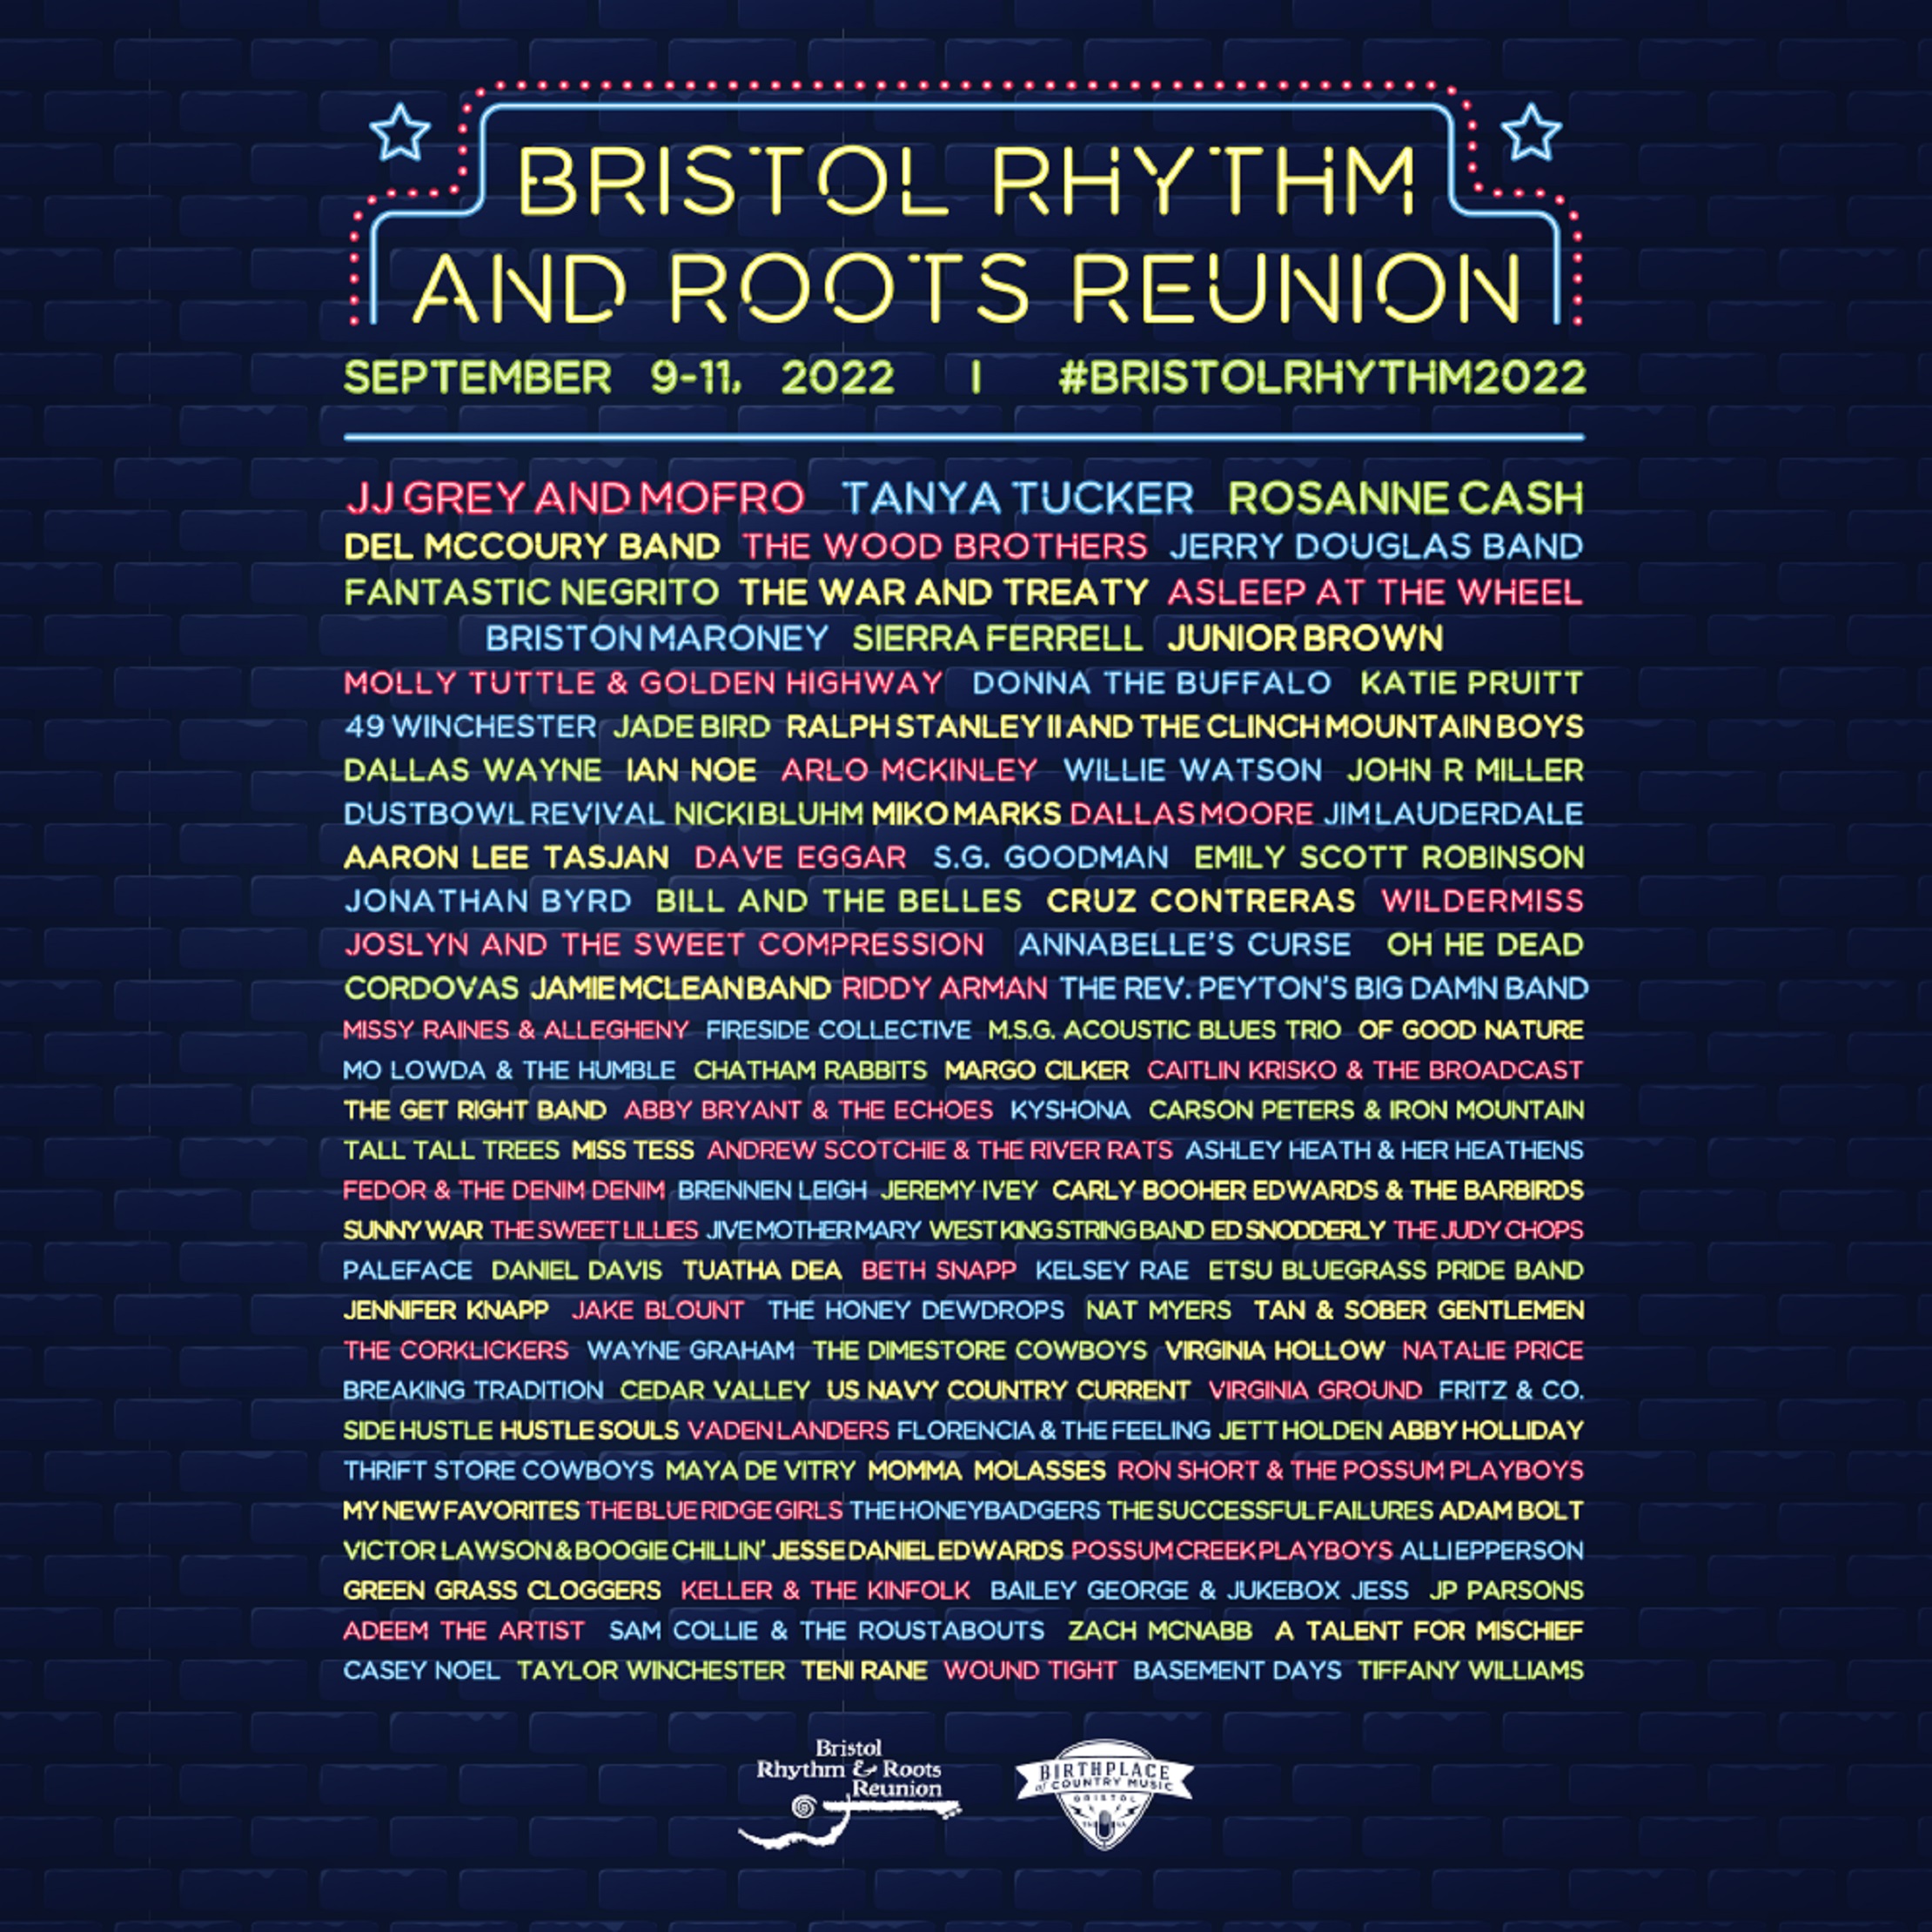 The War & Treaty, Molly Tuttle & Golden Highway and More Coming to Bristol Rhythm & Roots Reunion 2022